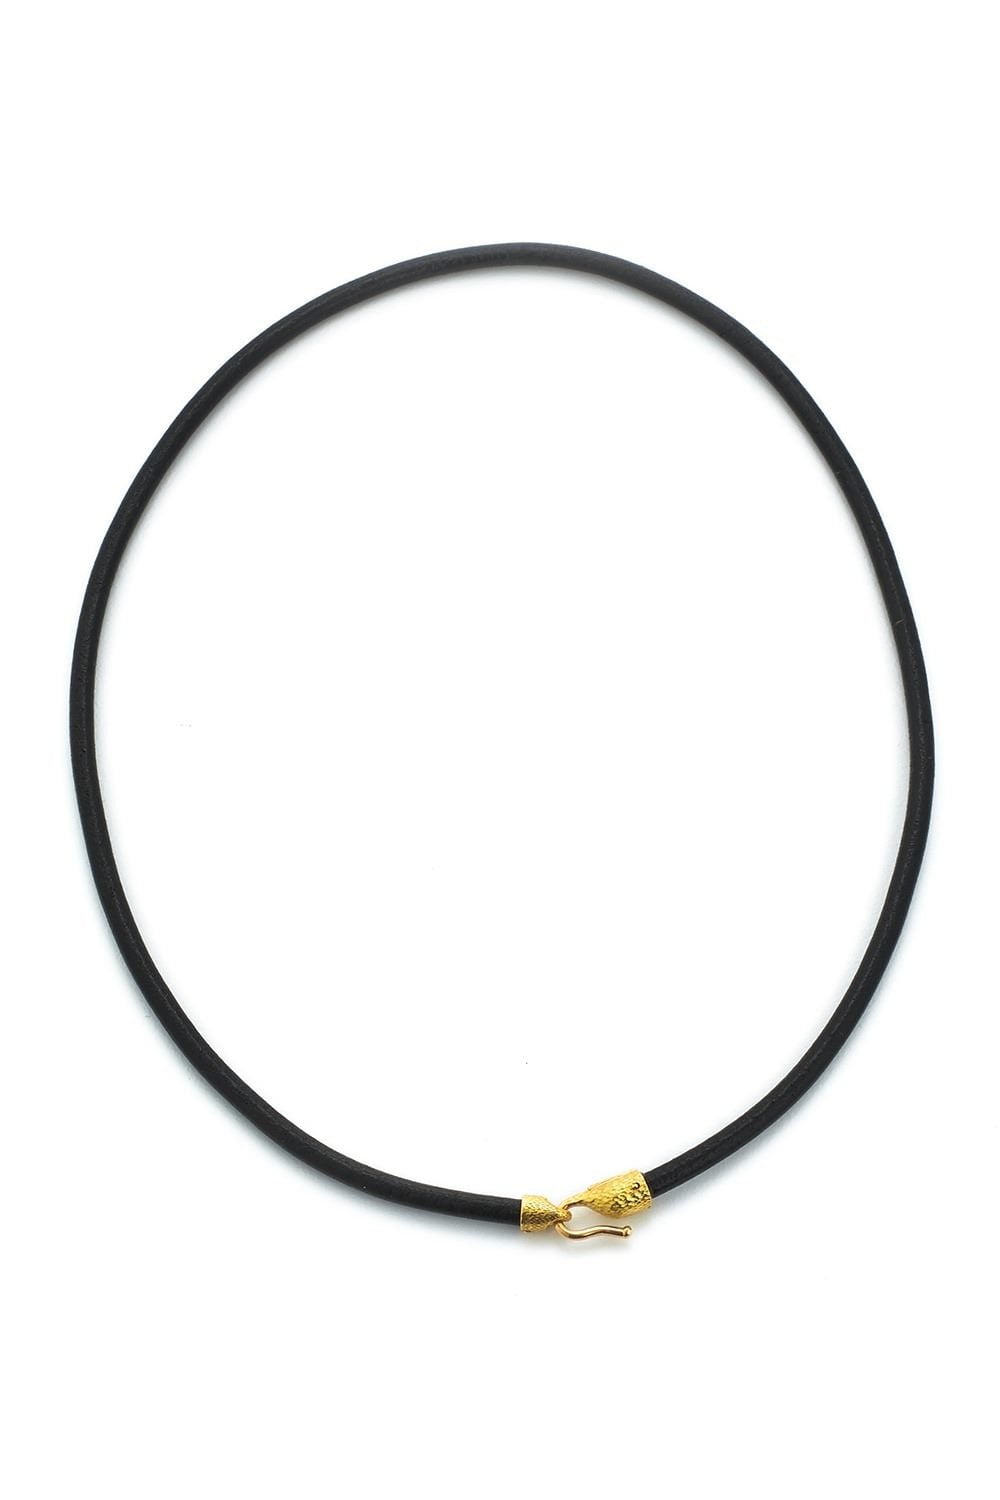 DAVID WEBB-Black Leather Cord - 16in-YELLOW GOLD